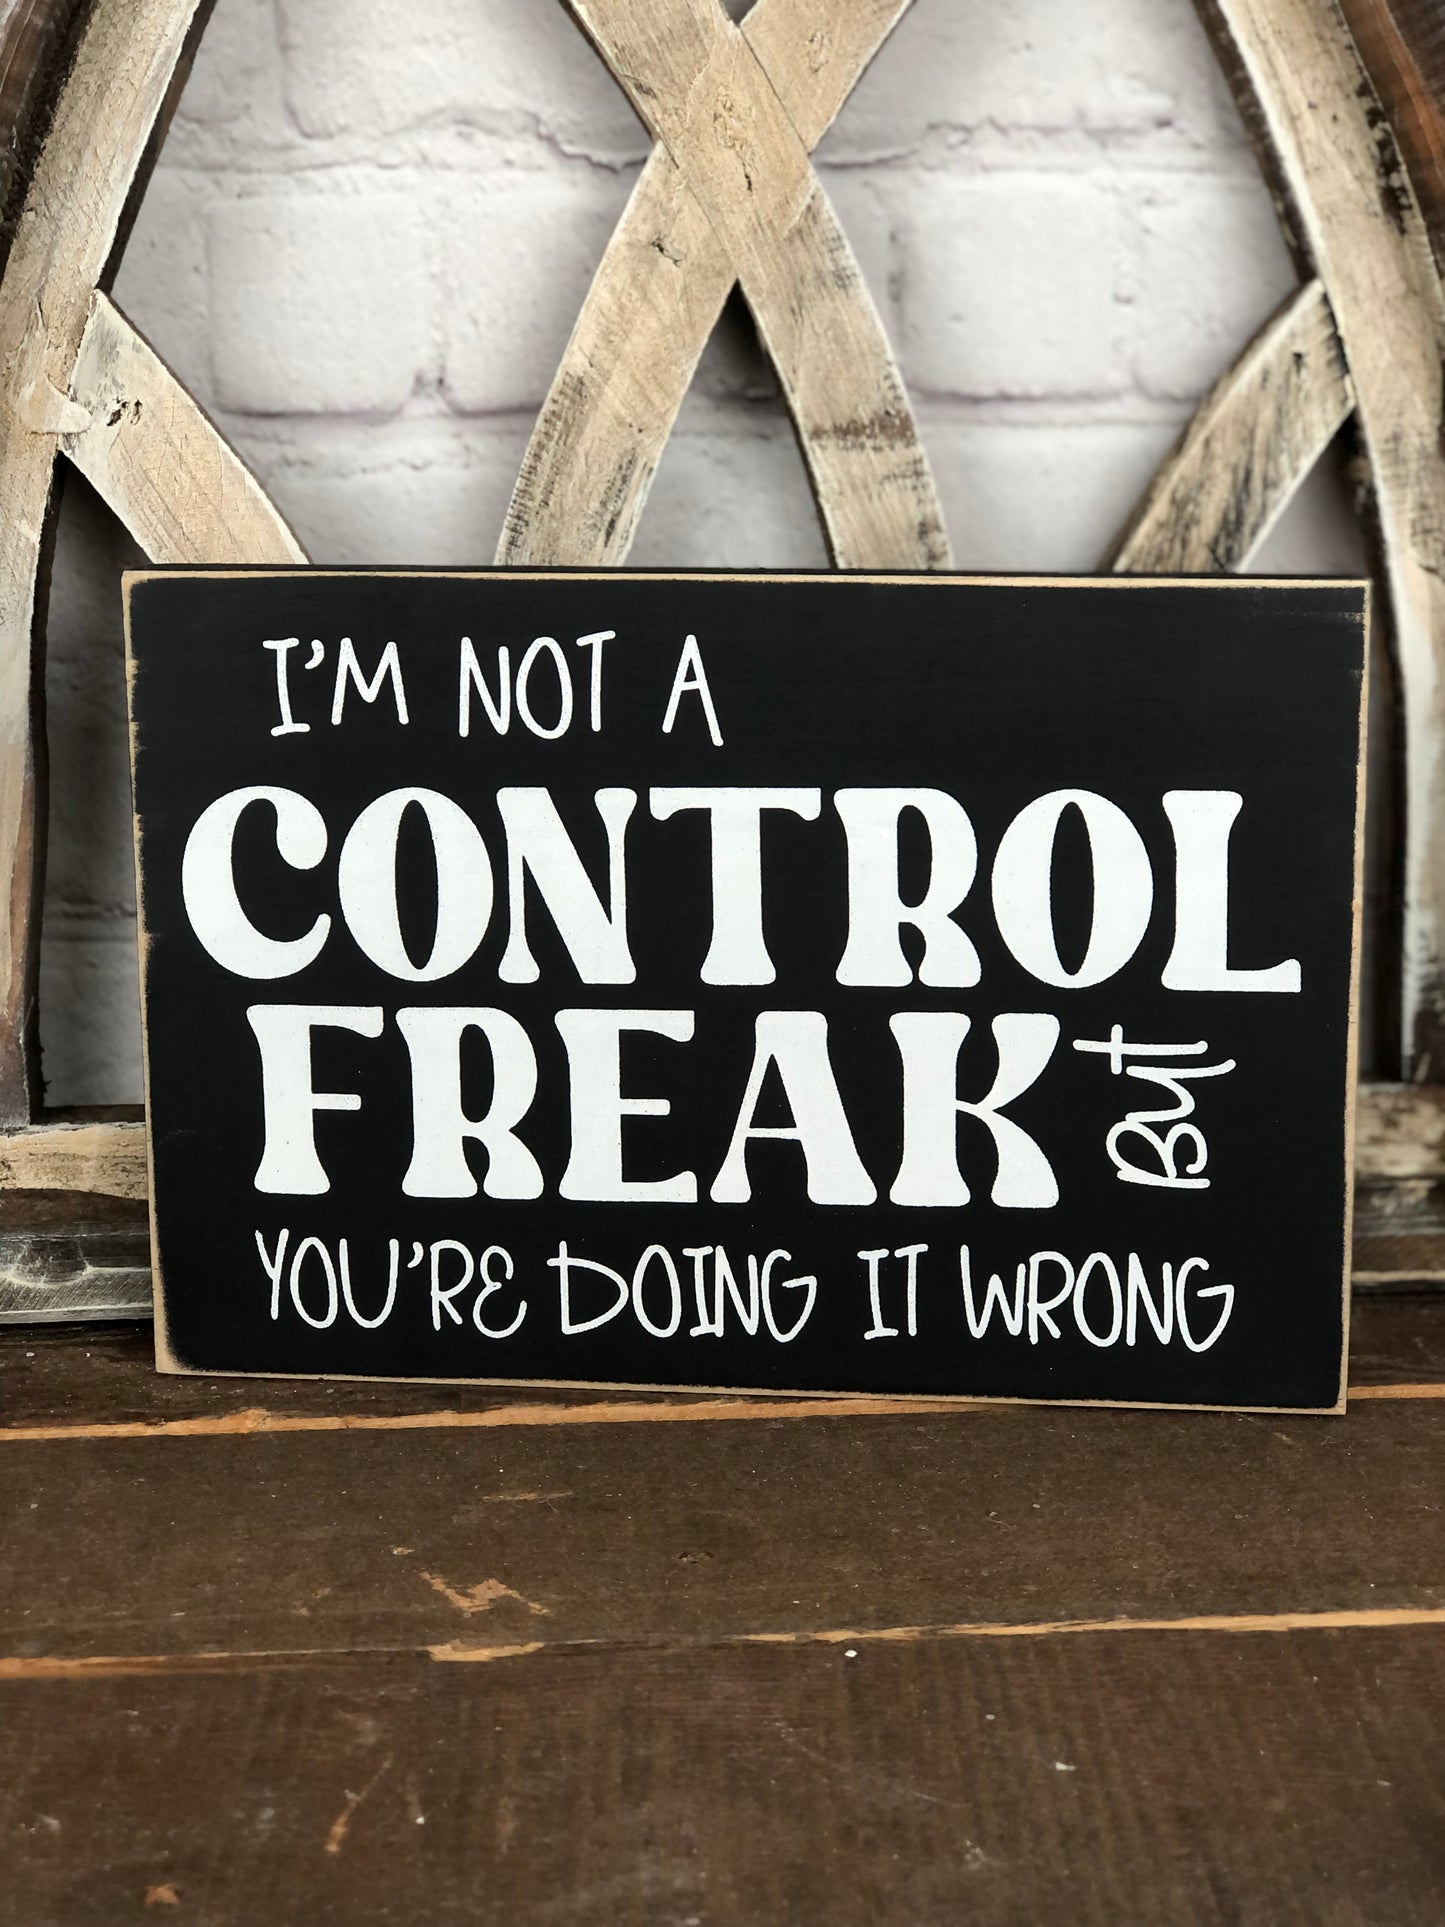 I’M NOT A CONTROL FREAK BUT YOU’RE DOING IT WRONG - WOOD SIGN